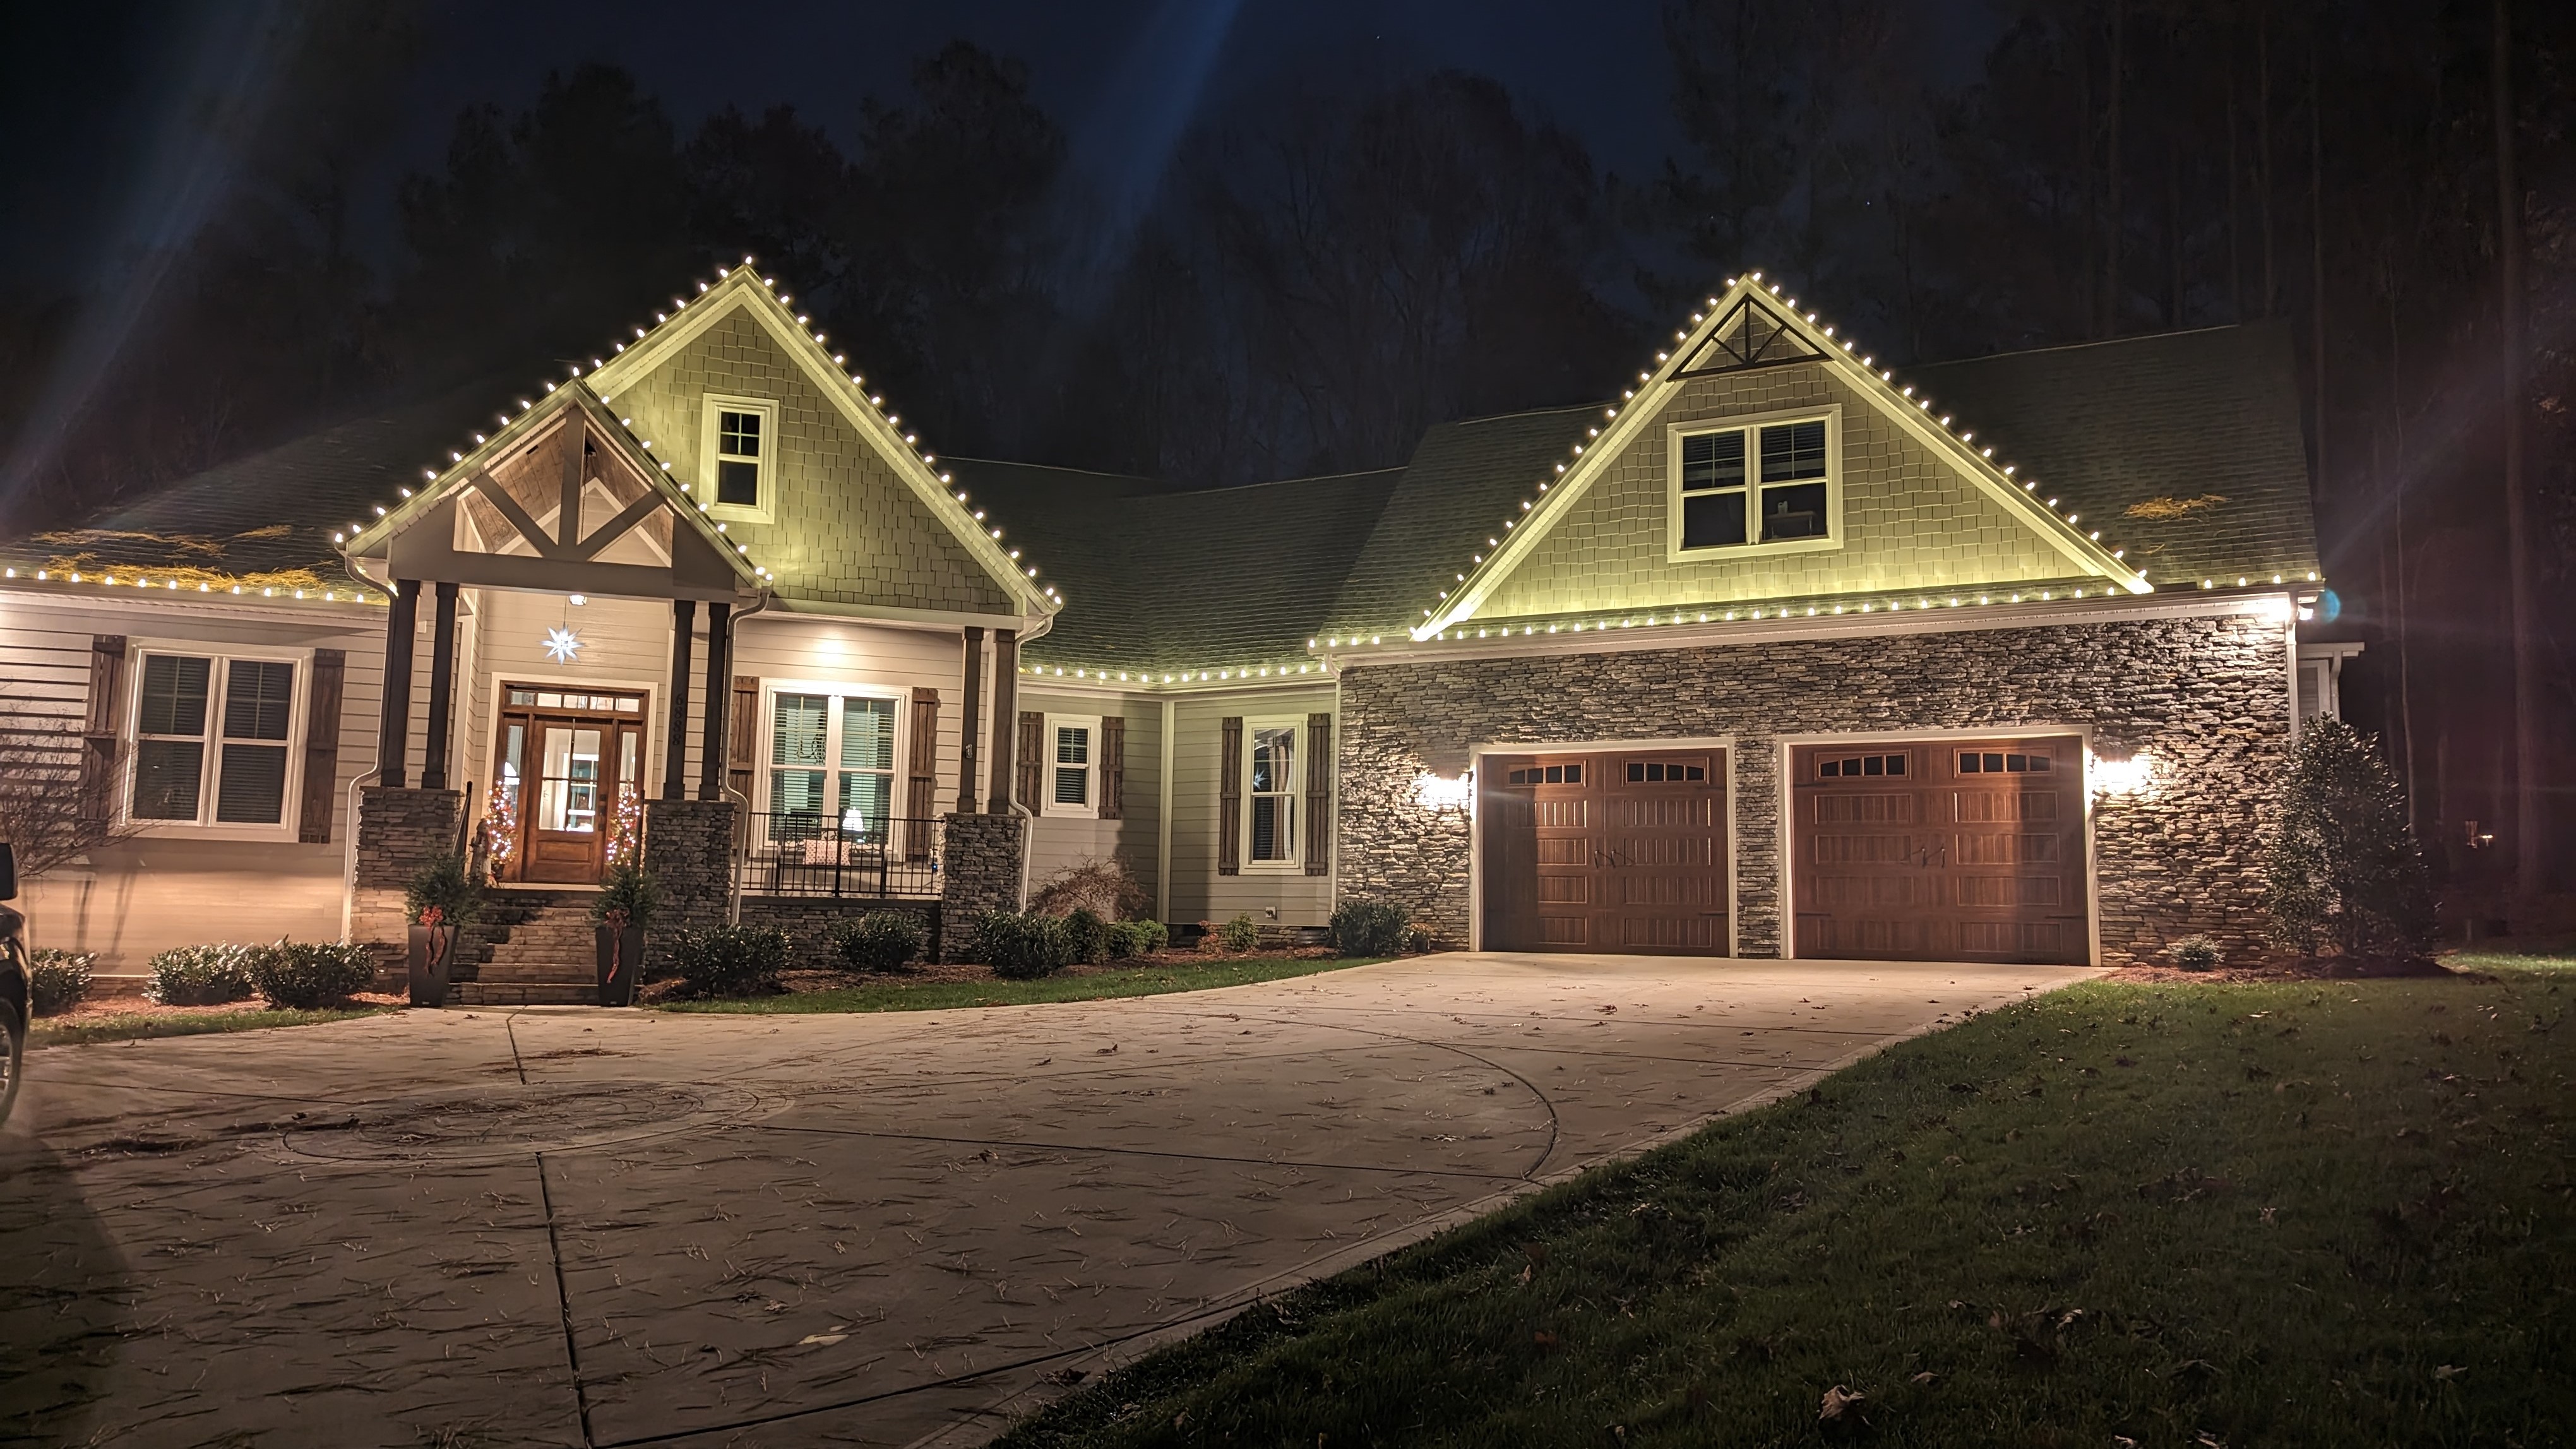 A Festive Transformation in Denver, NC: From Sparkling Windows to Enchanting Christmas Lights